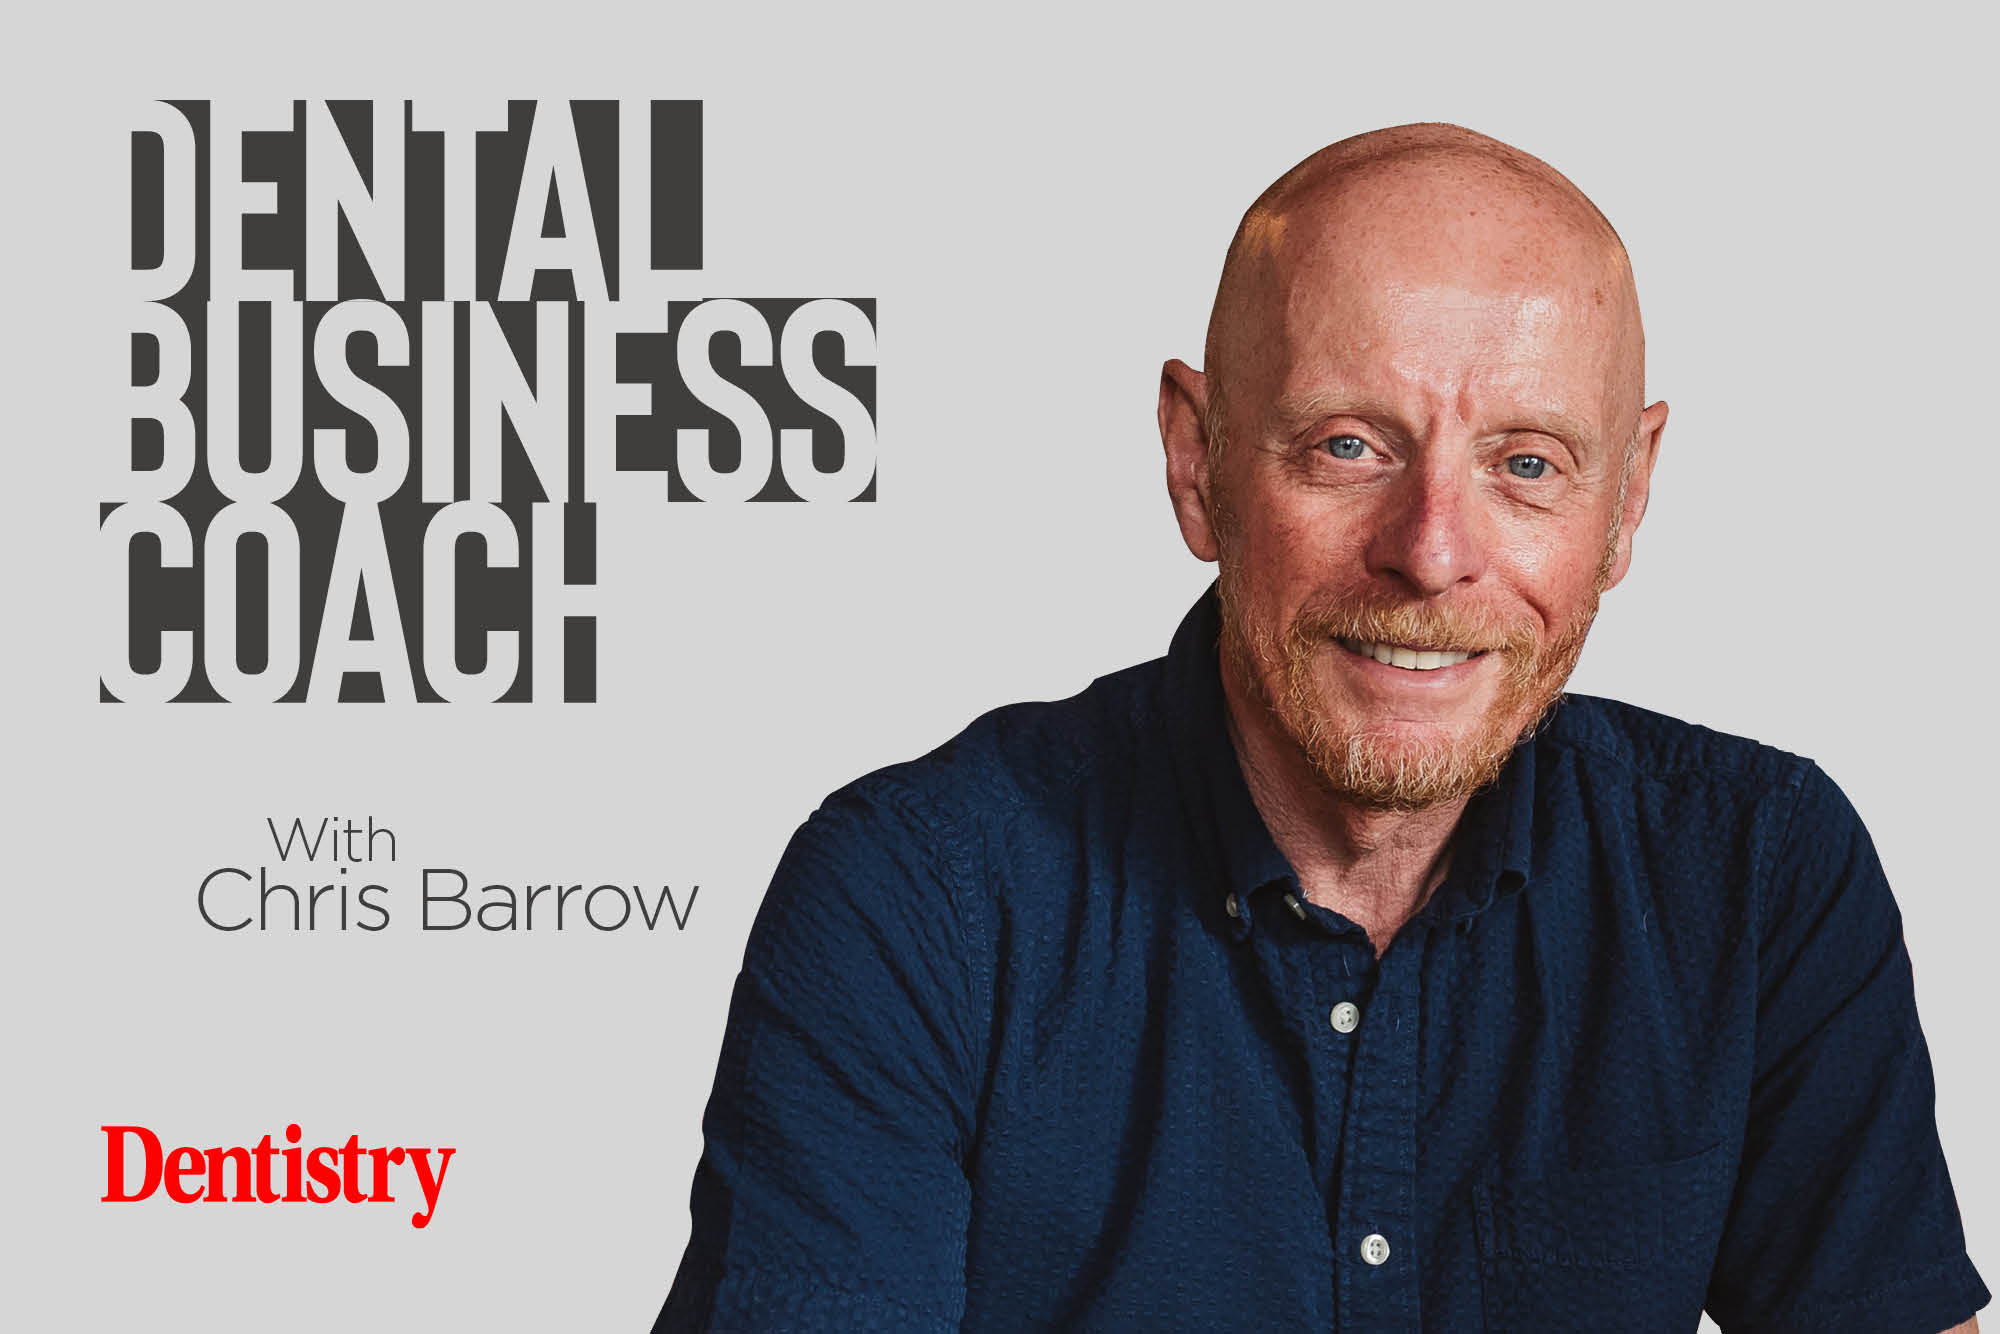 chris barrow dental business coach discusses the changing concerns of recently-qualified dental professionals